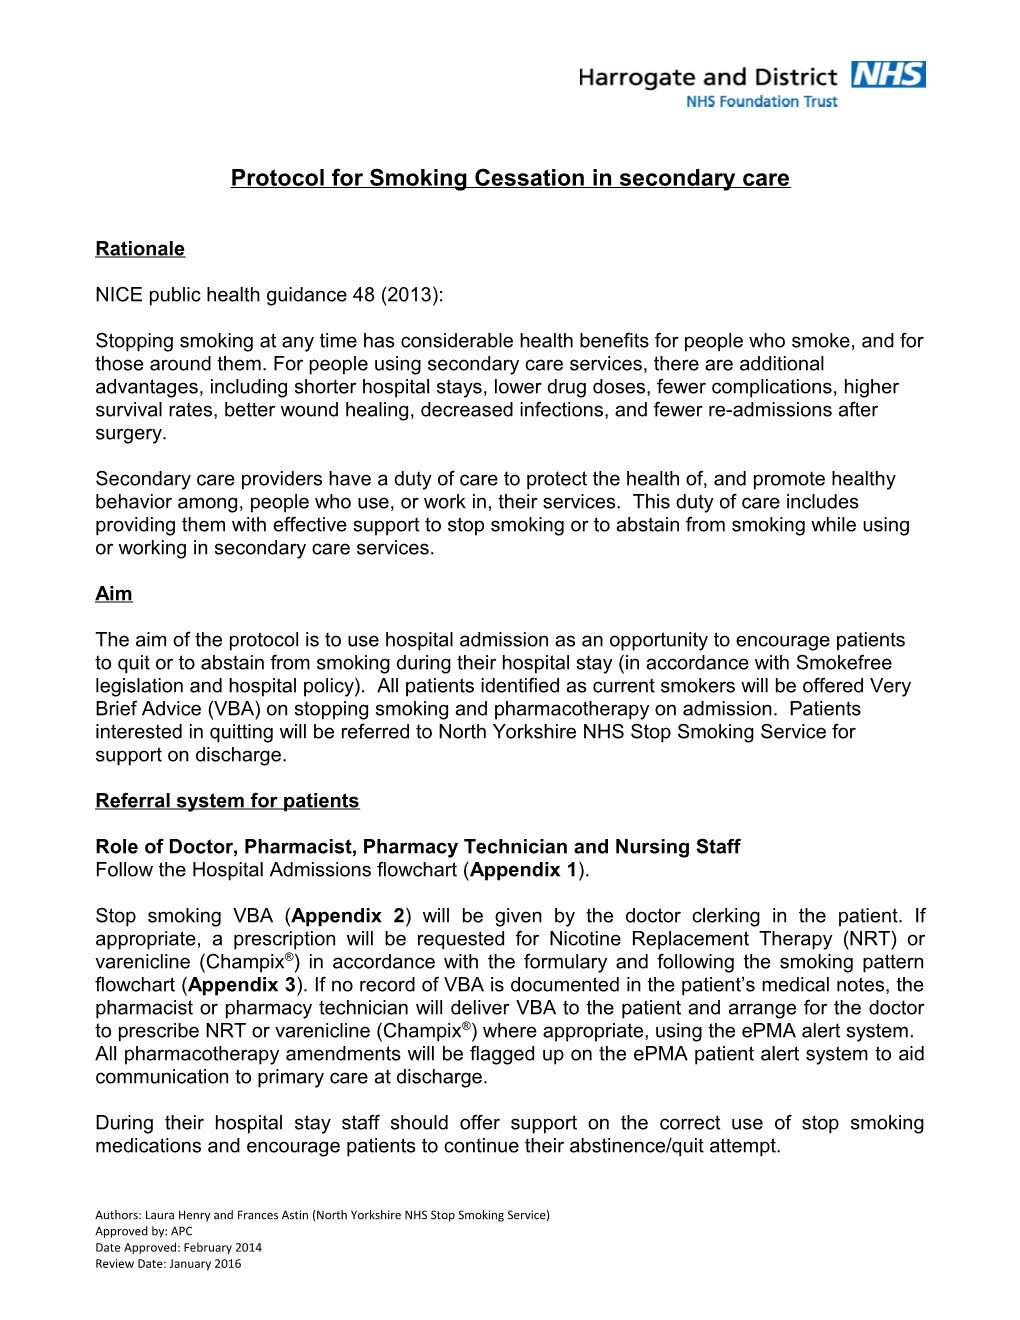 Protocol for Smoking Cessation in Secondary Care